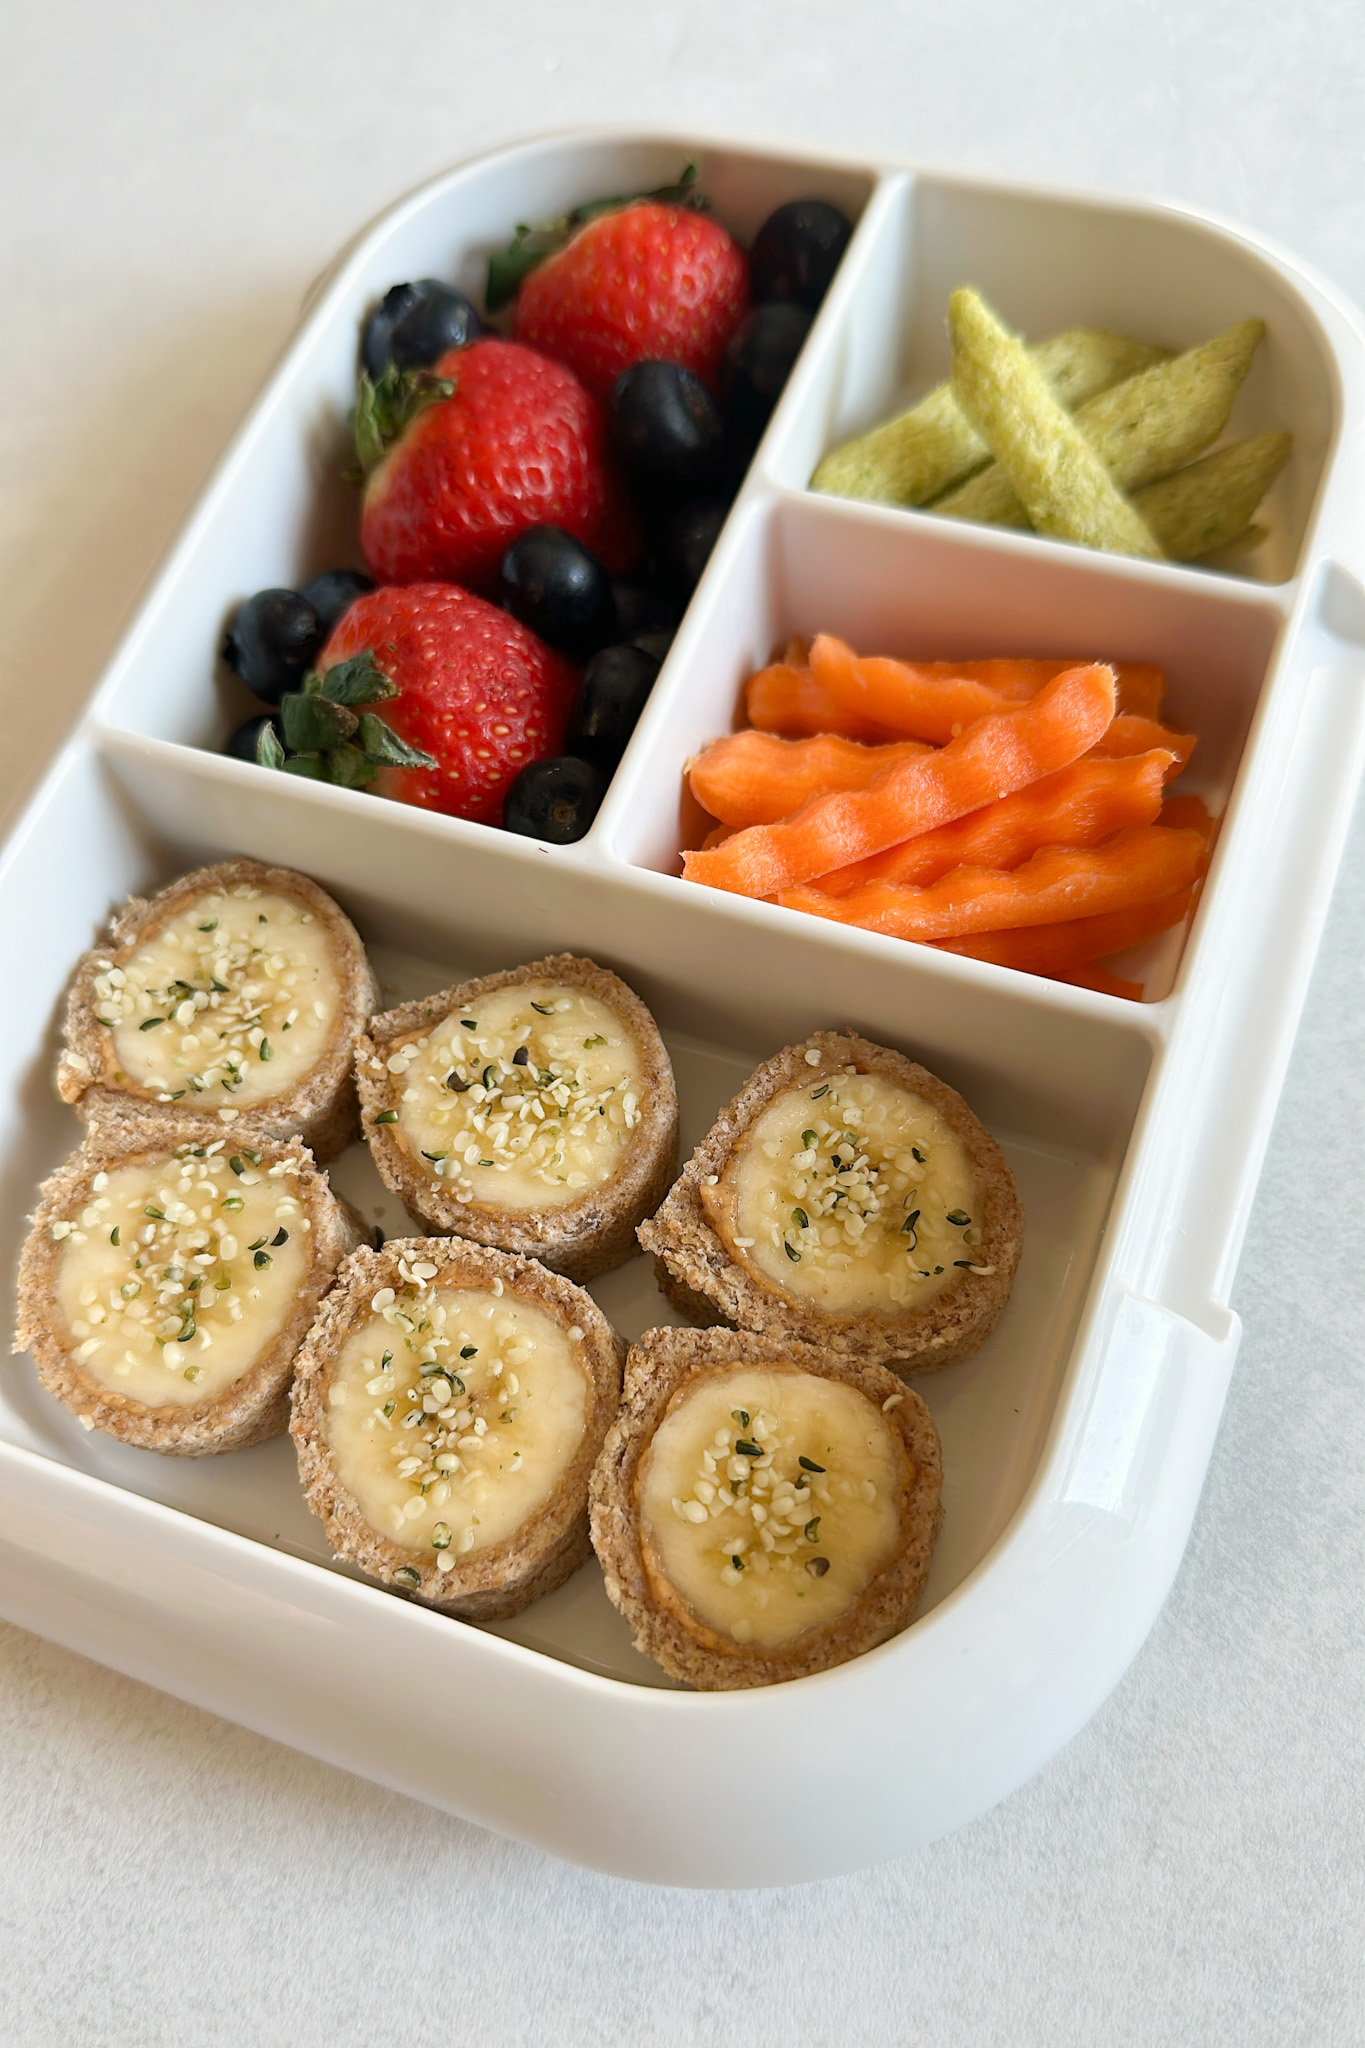 Kids lunchbox with banana sushi rolls, berries, carrots, and pea crisps.